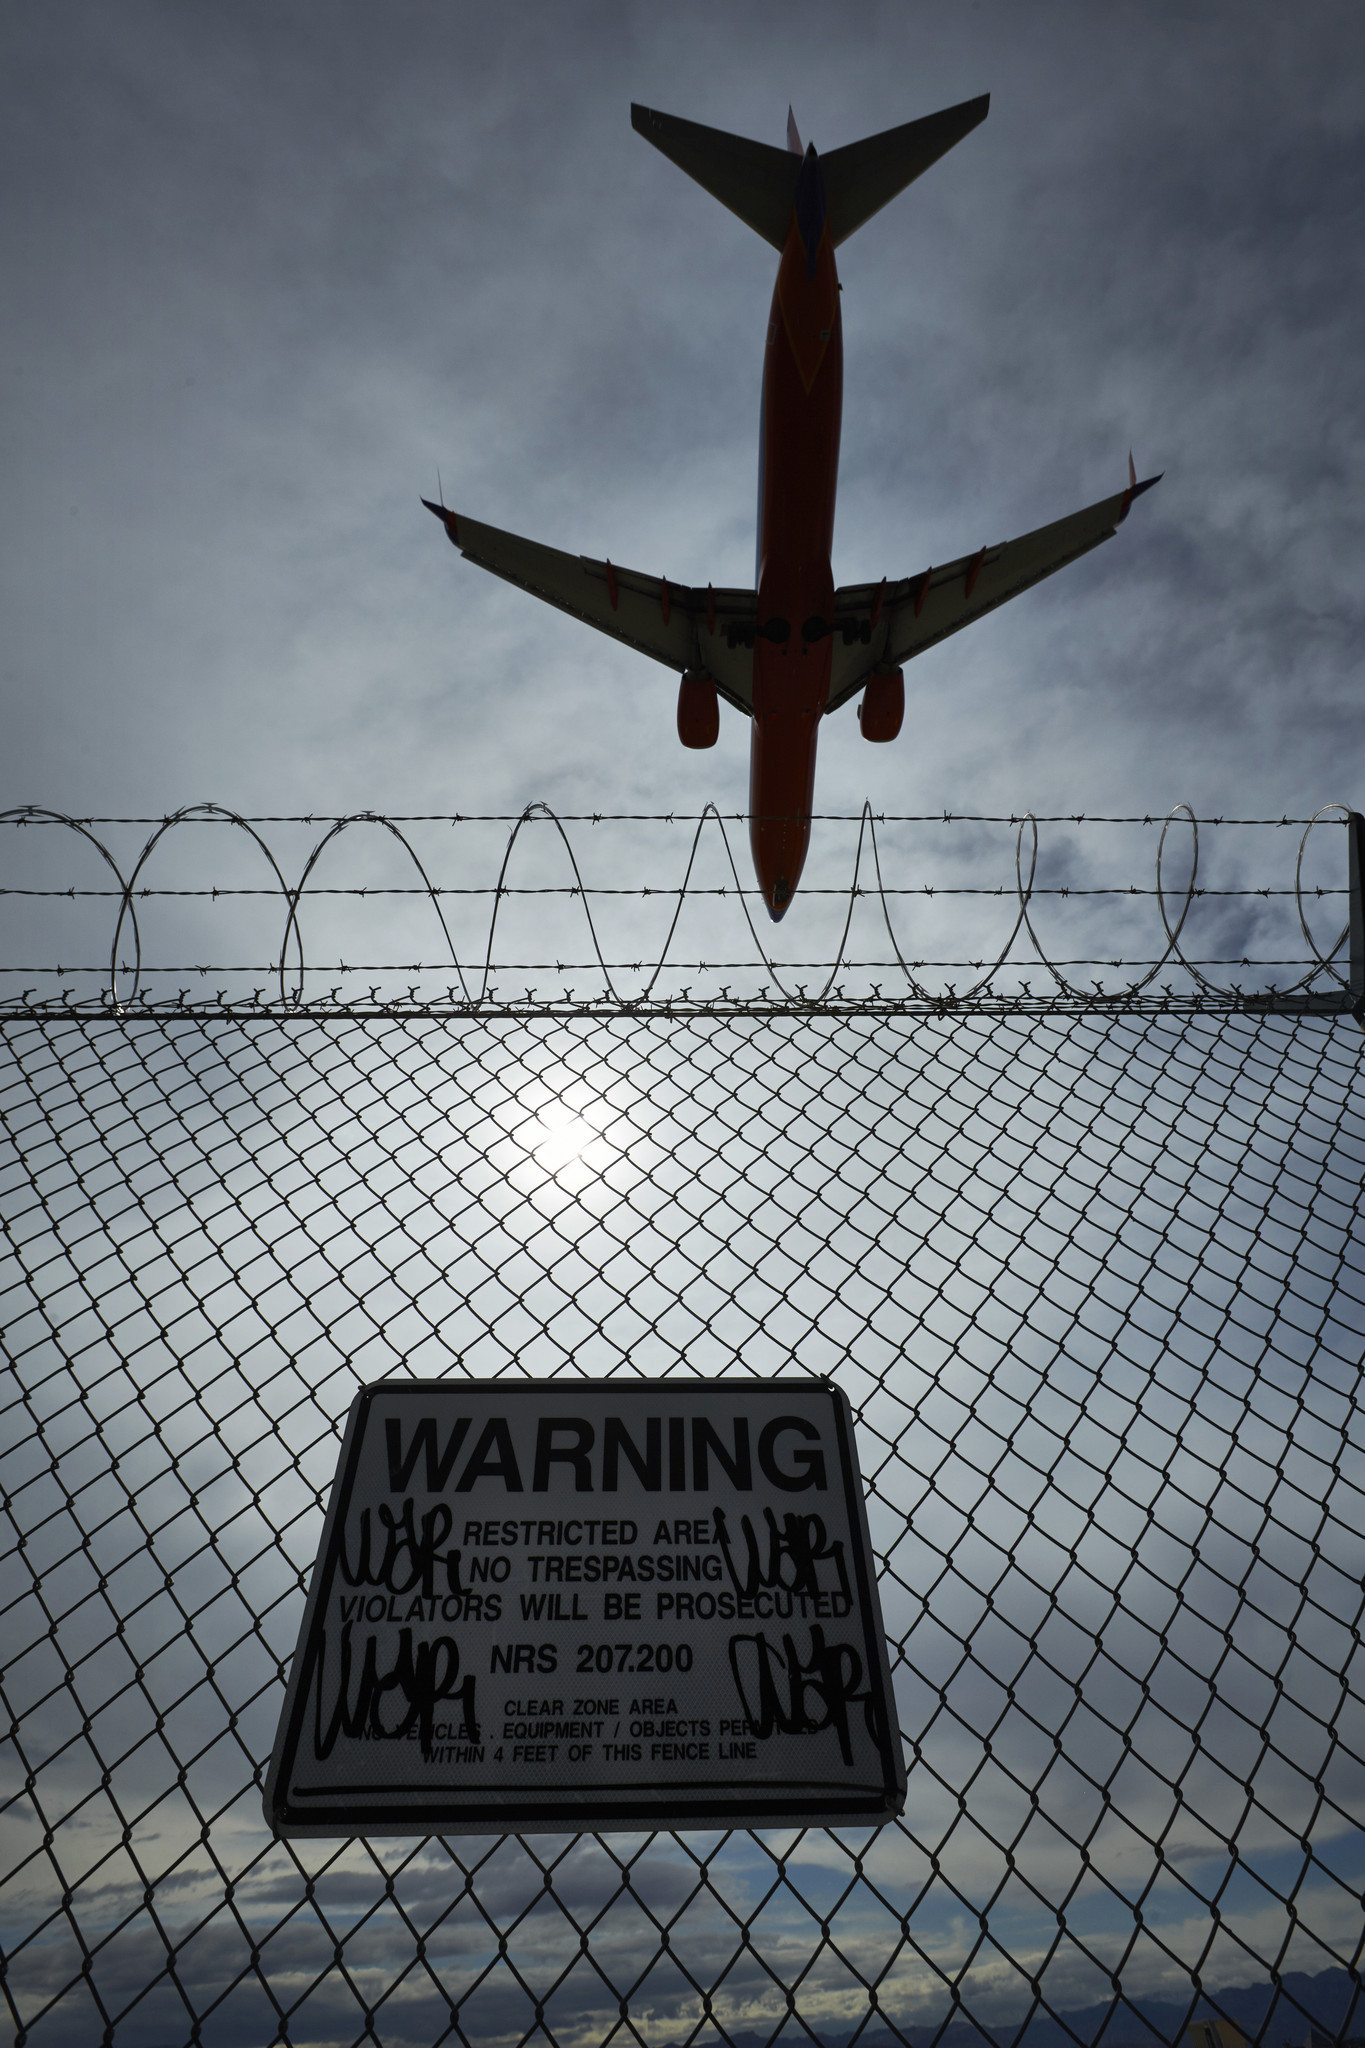 Intruders breach U.S. airport fences about every 10 days - Chicago Tribune1365 x 2048